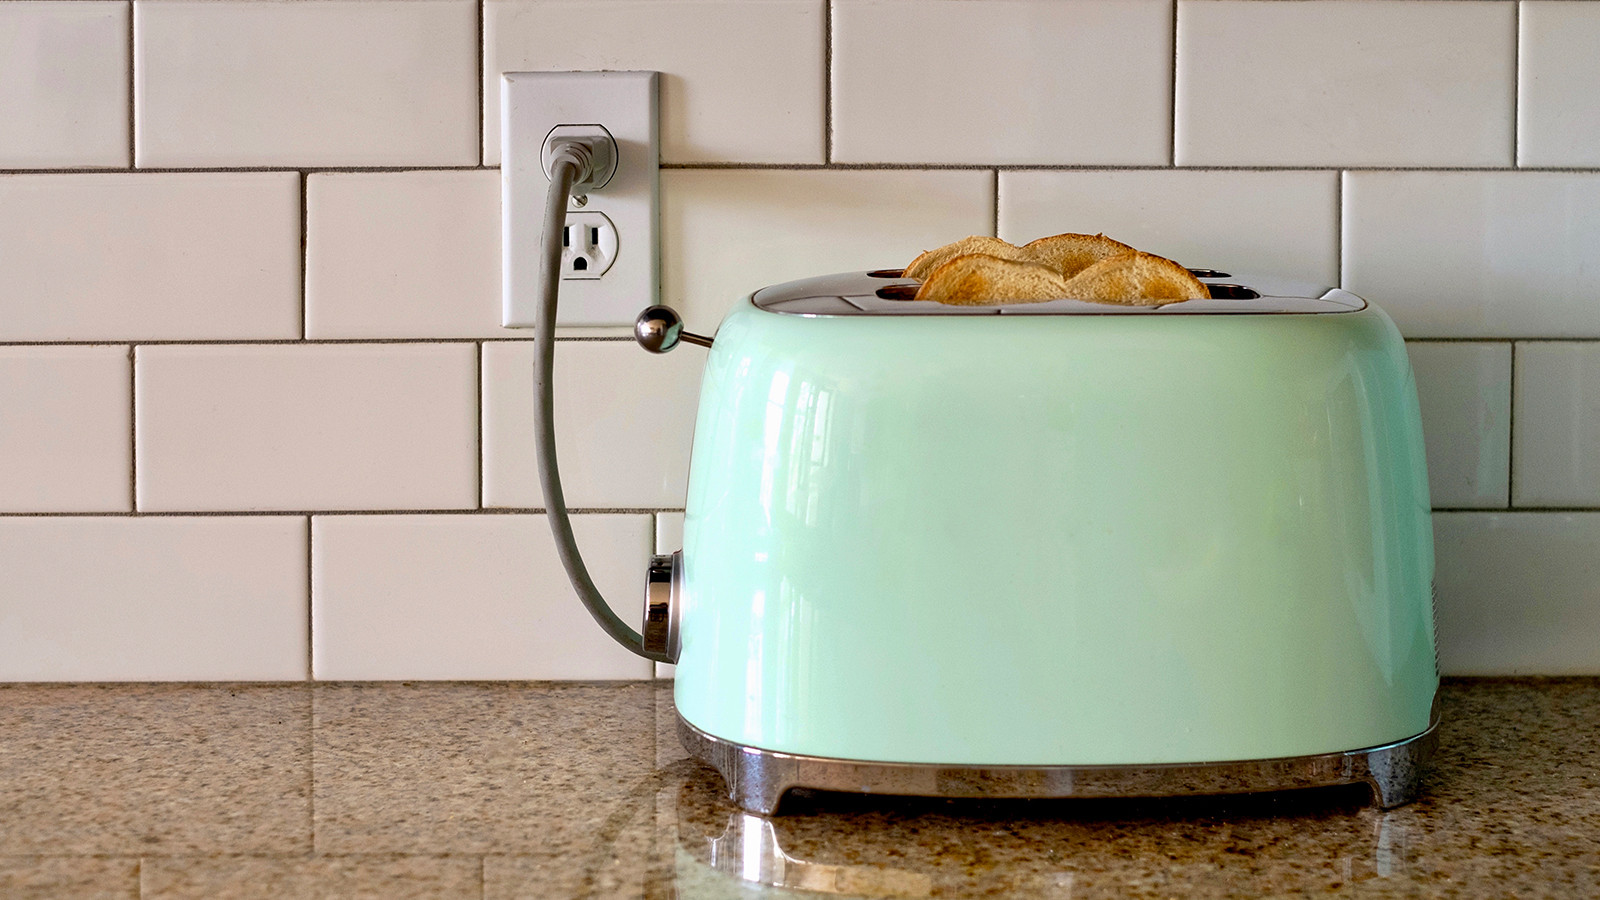 A green toaster on a kitchen countertop plugged into an electric outlet.